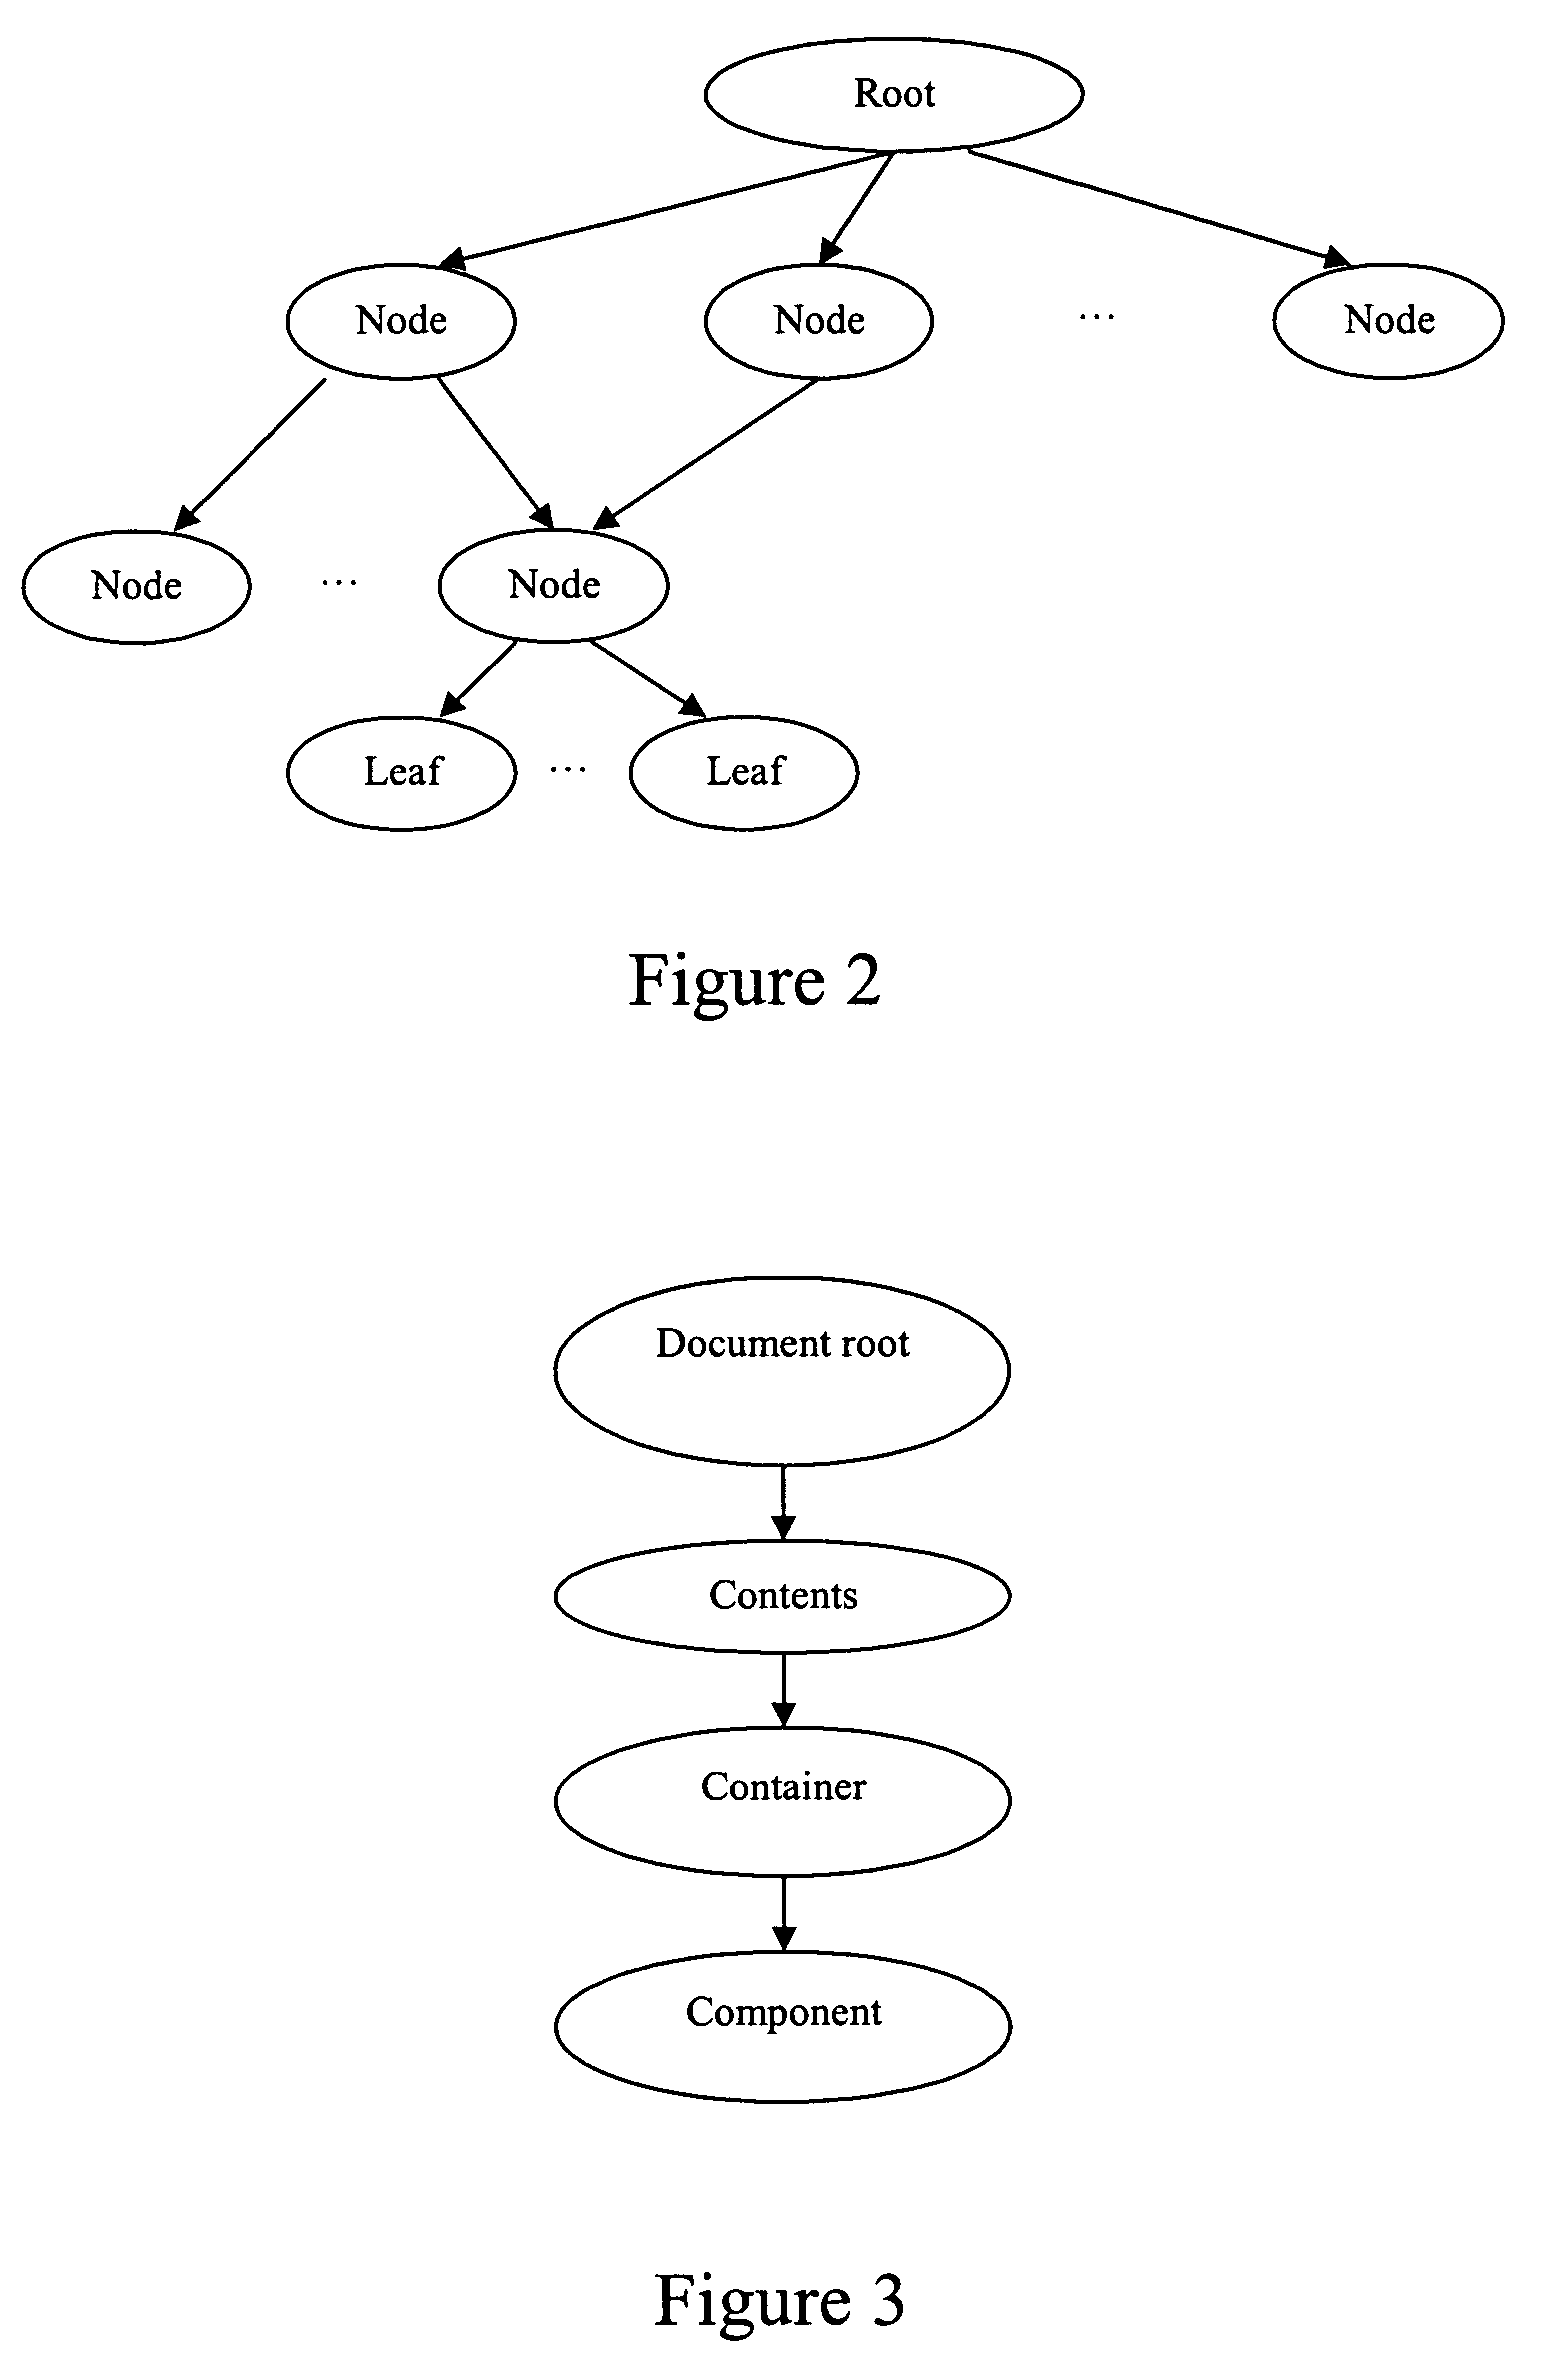 Method for paginating a document structure of a document for viewing on a mobile communication device